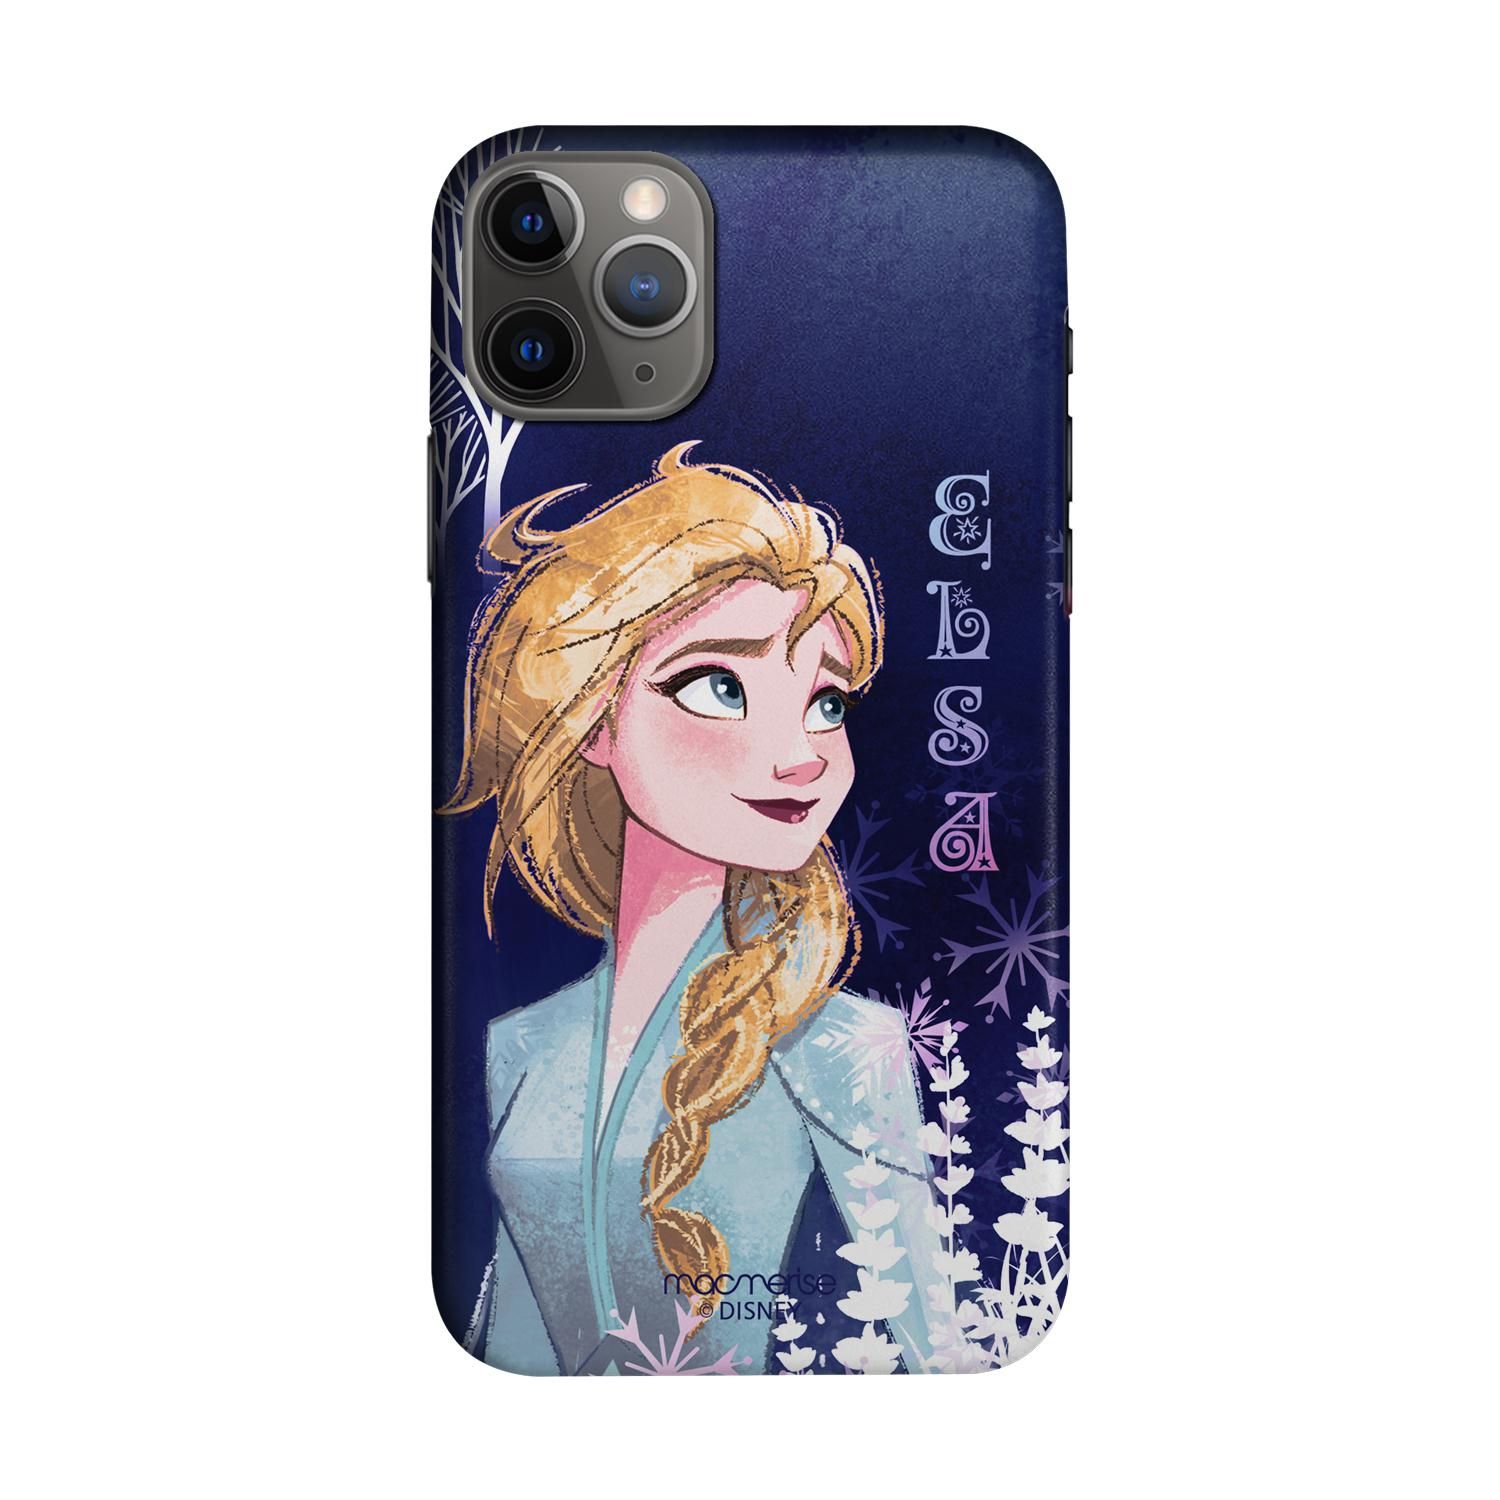 Buy Strong Elsa - Sleek Phone Case for iPhone 11 Pro Max Online